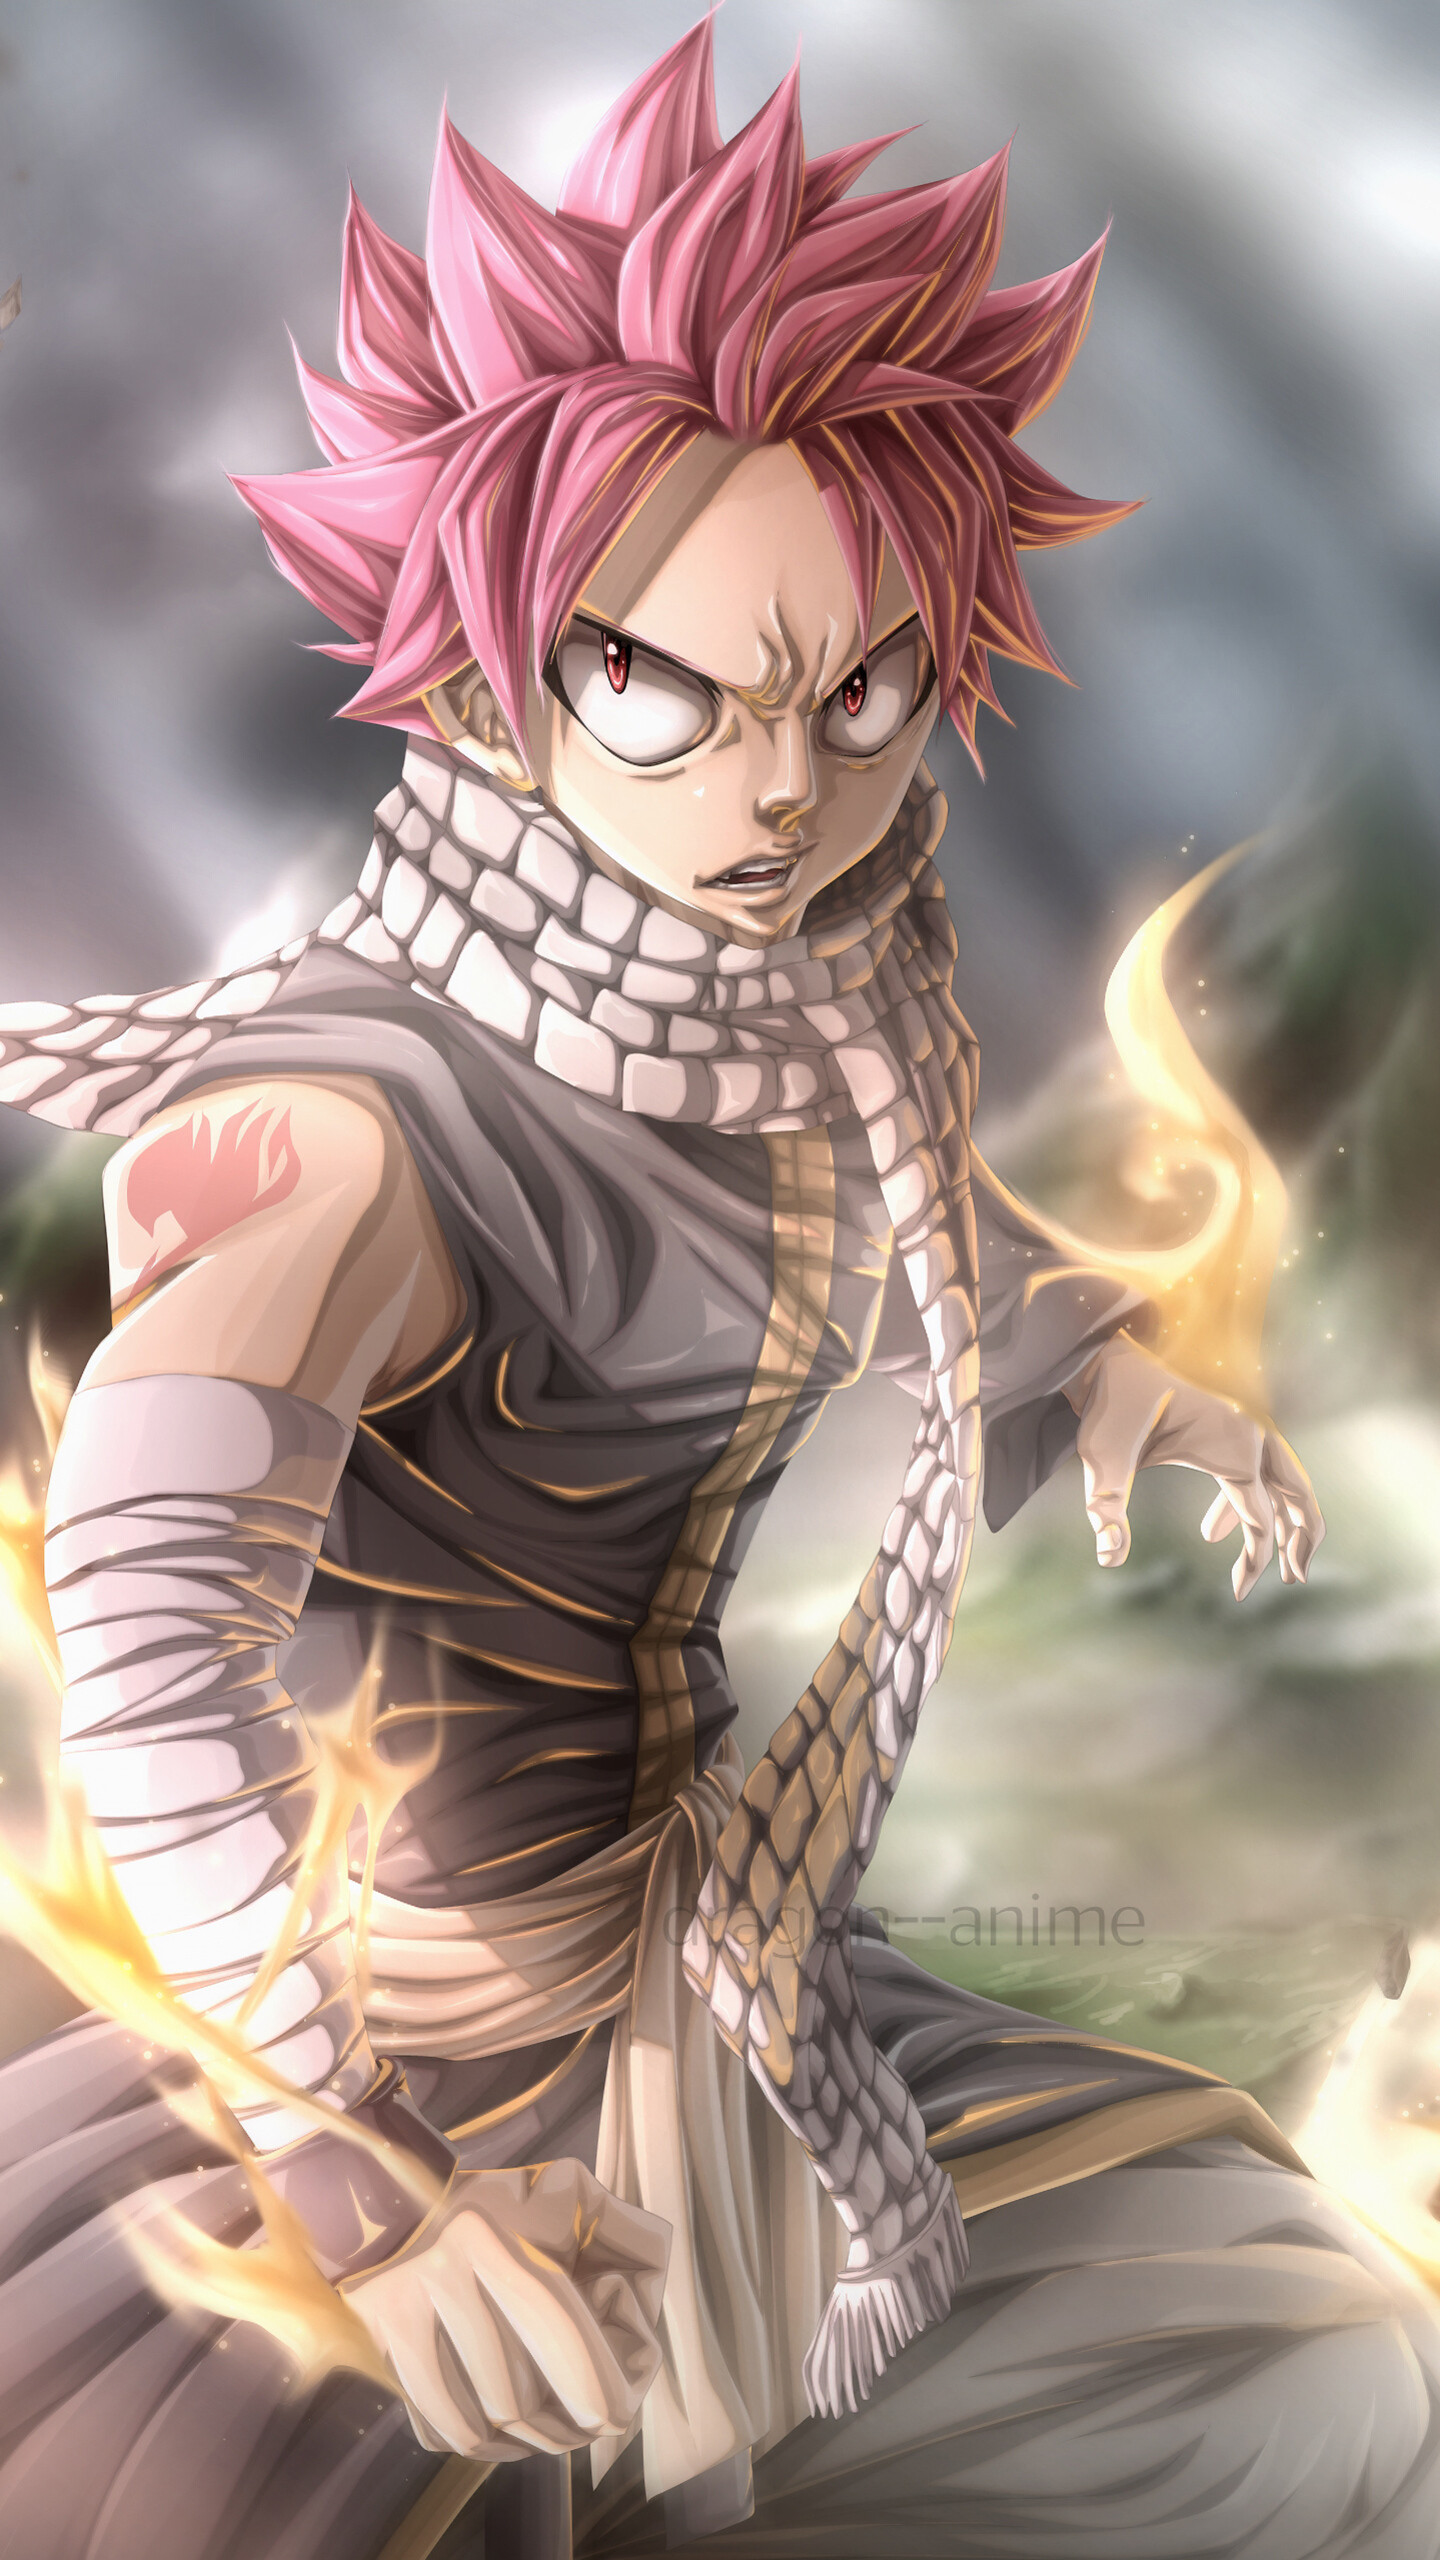 Fairy Tail: Natsu Dragneel, a demon known as "Etherious Natsu Dragneel" (E.N.D.). 1440x2560 HD Background.